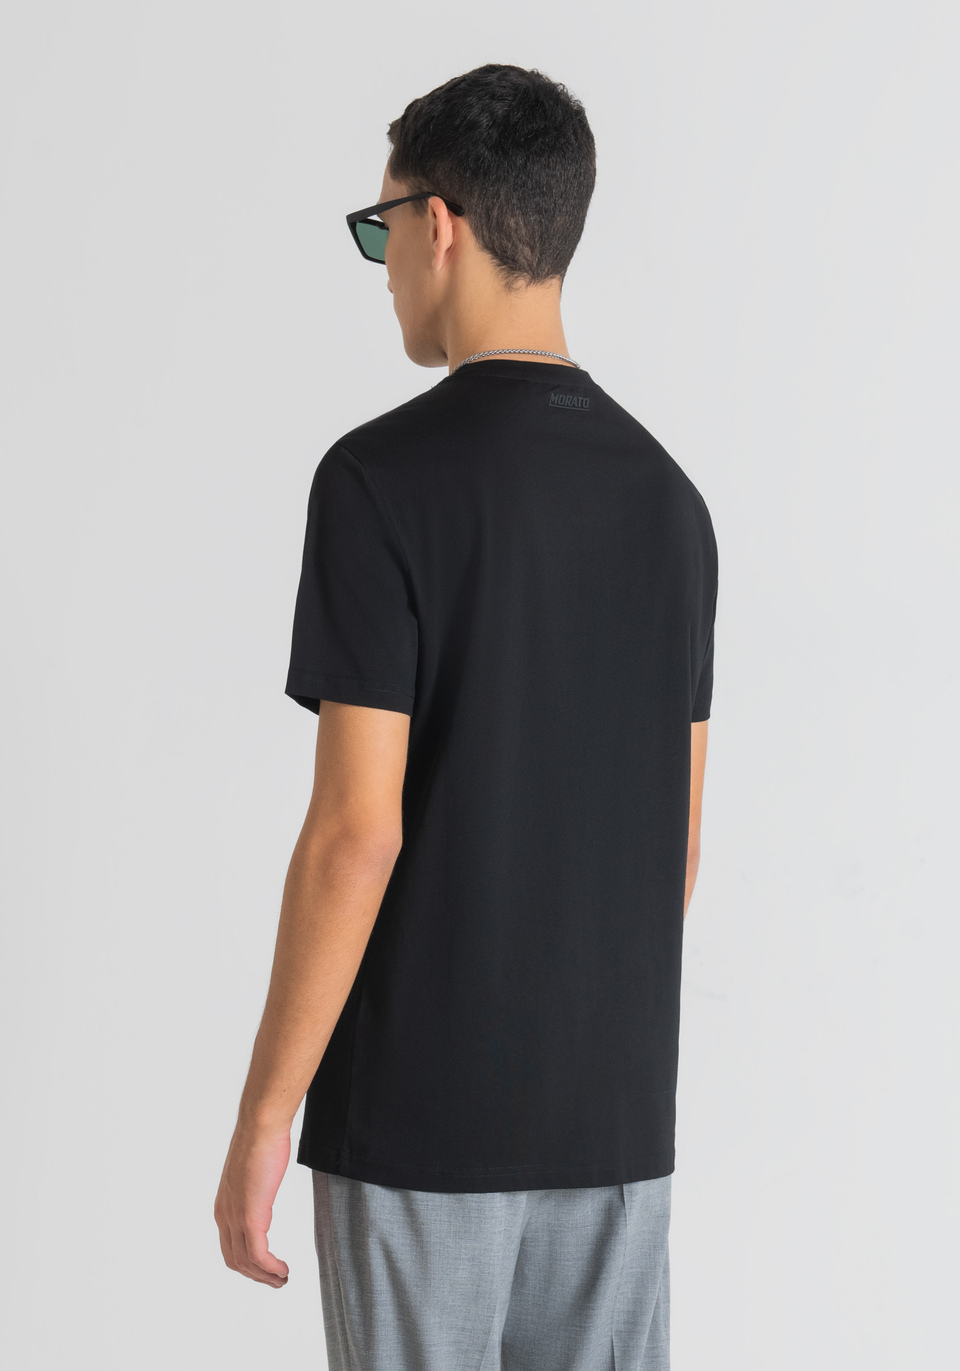 SLIM FIT T-SHIRT IN COTTON WITH TIGER PRINT - Antony Morato Online Shop